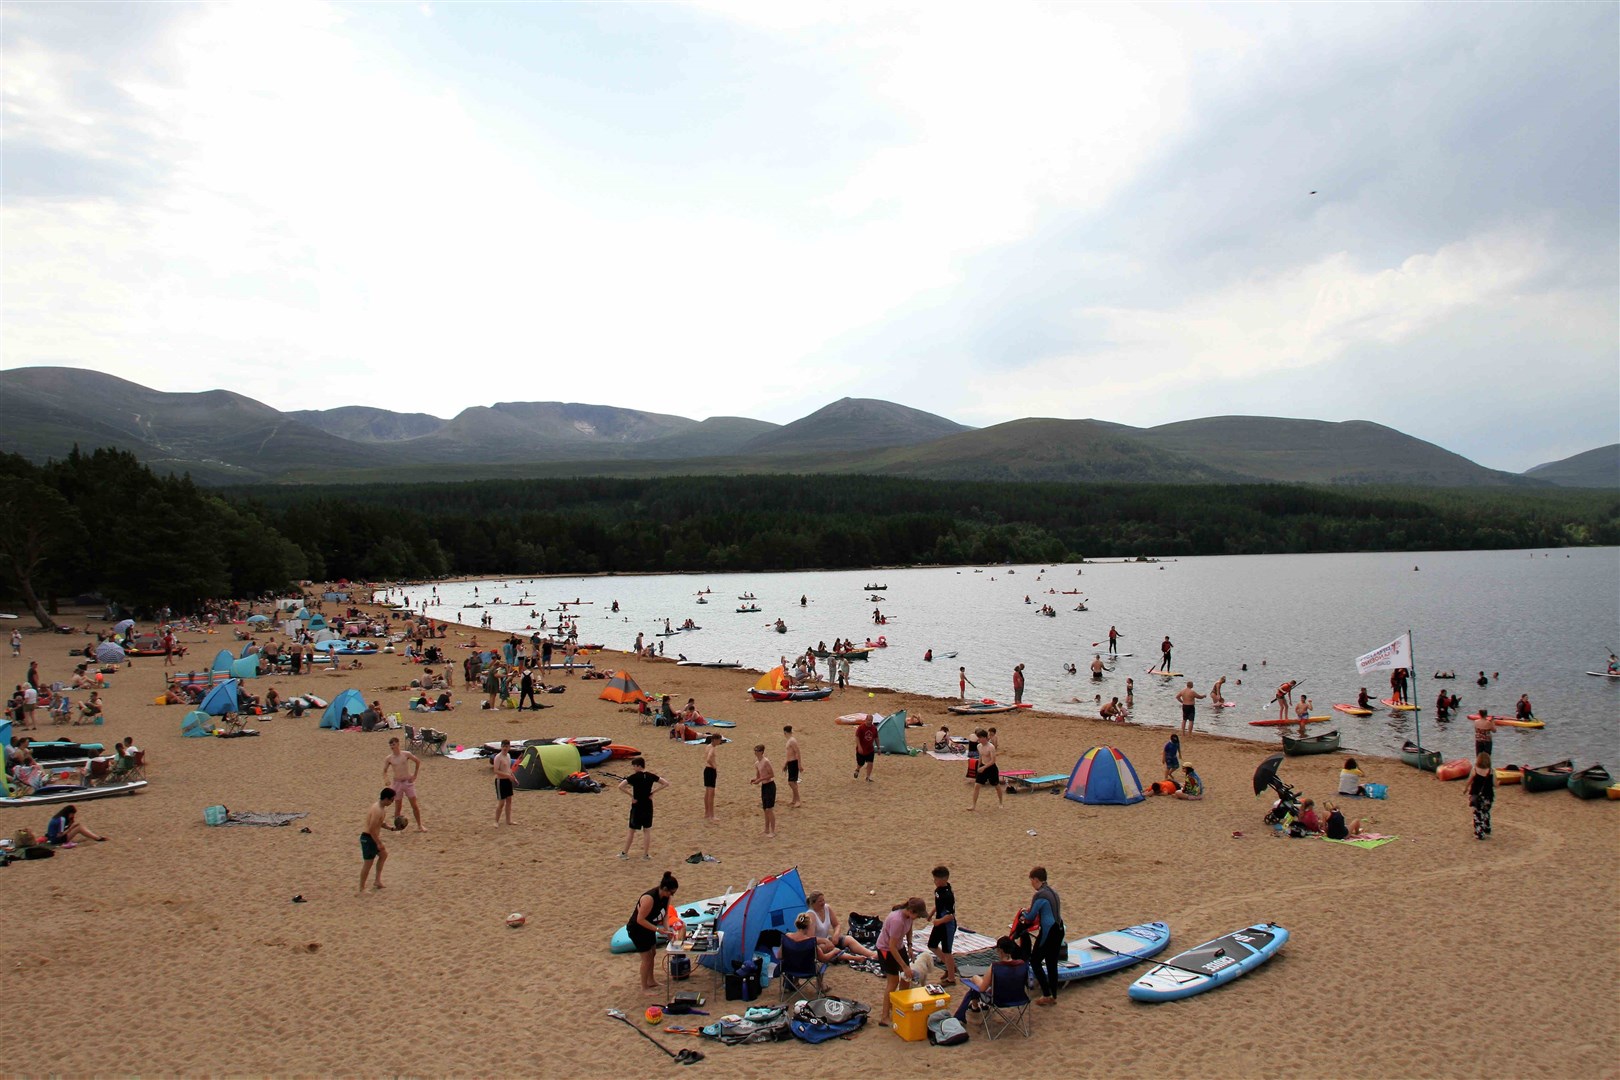 Beach goers gathered at Loch Morlich on Tuesday.